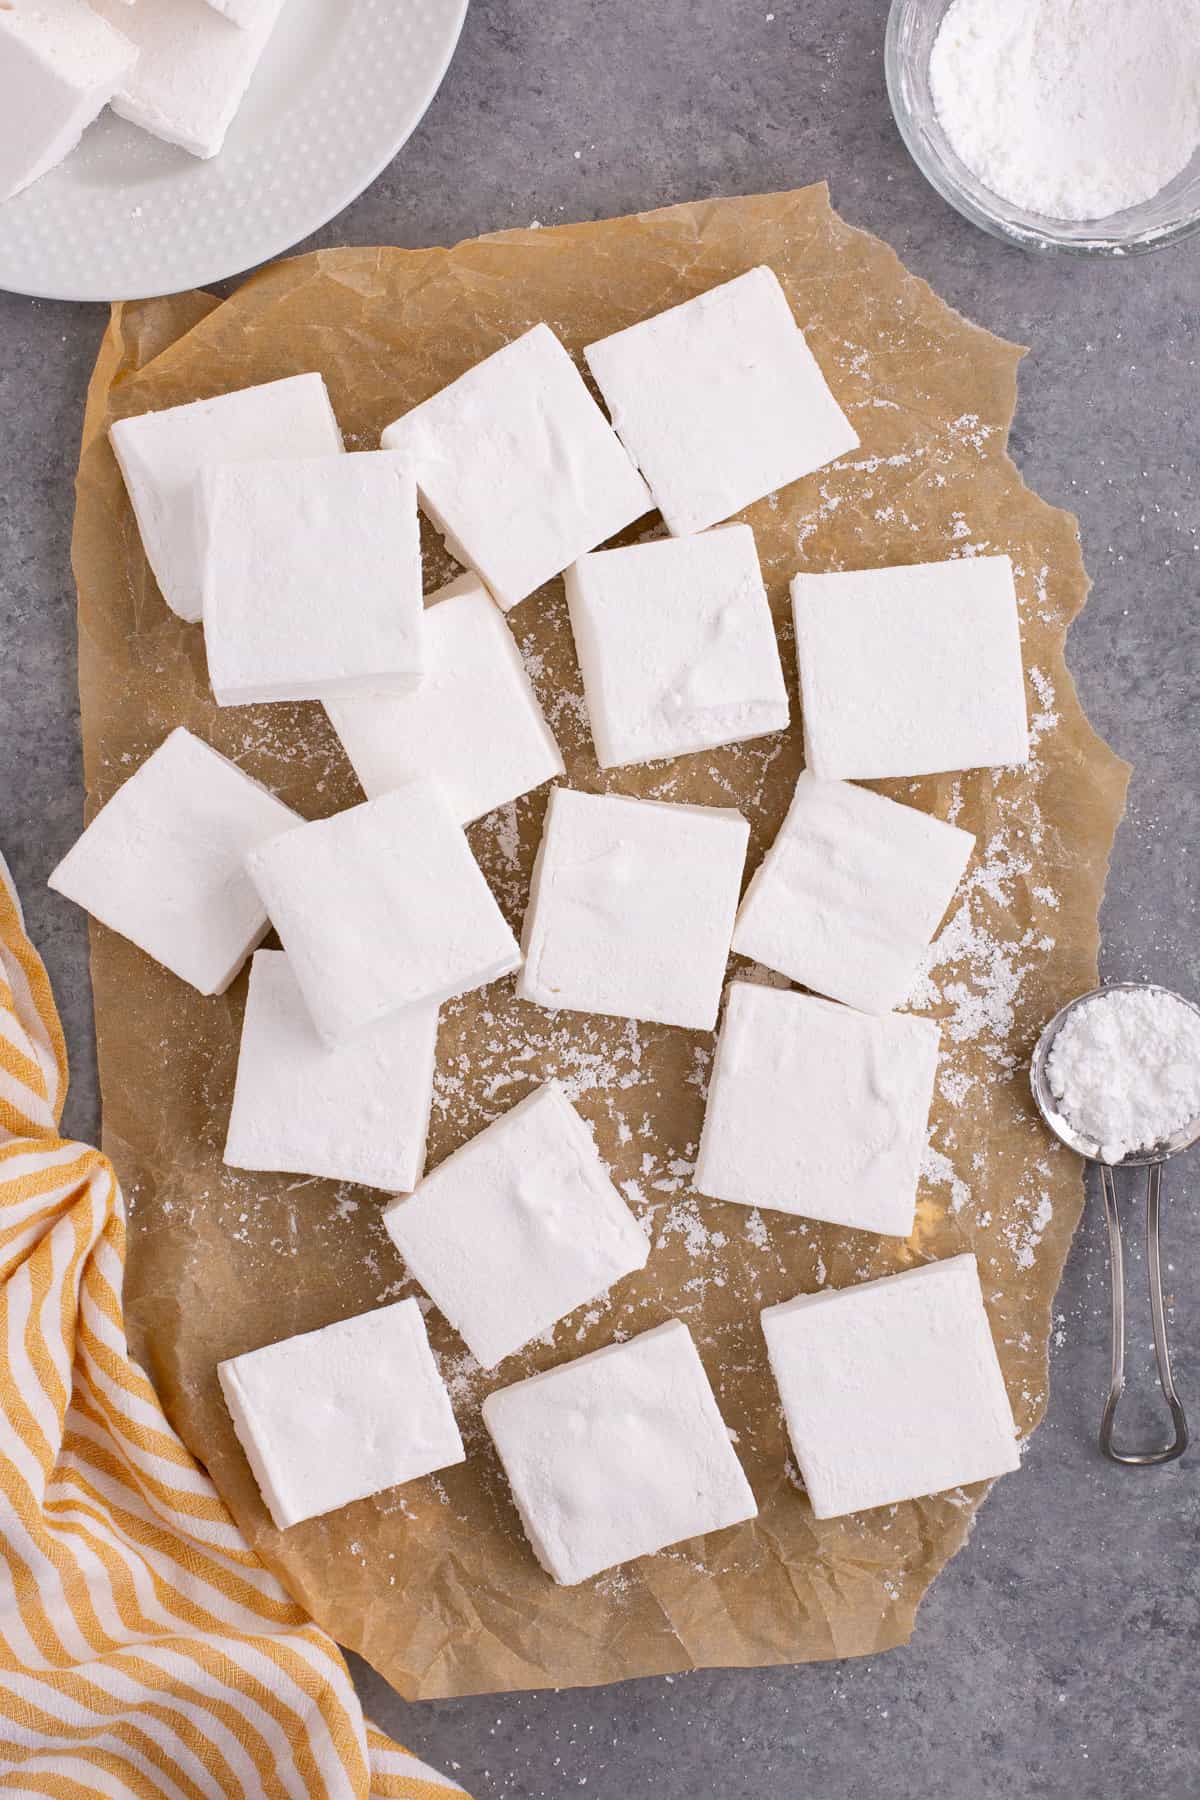 Homemade marshmallows on brown parchment paper with dusting of confectioners sugar.